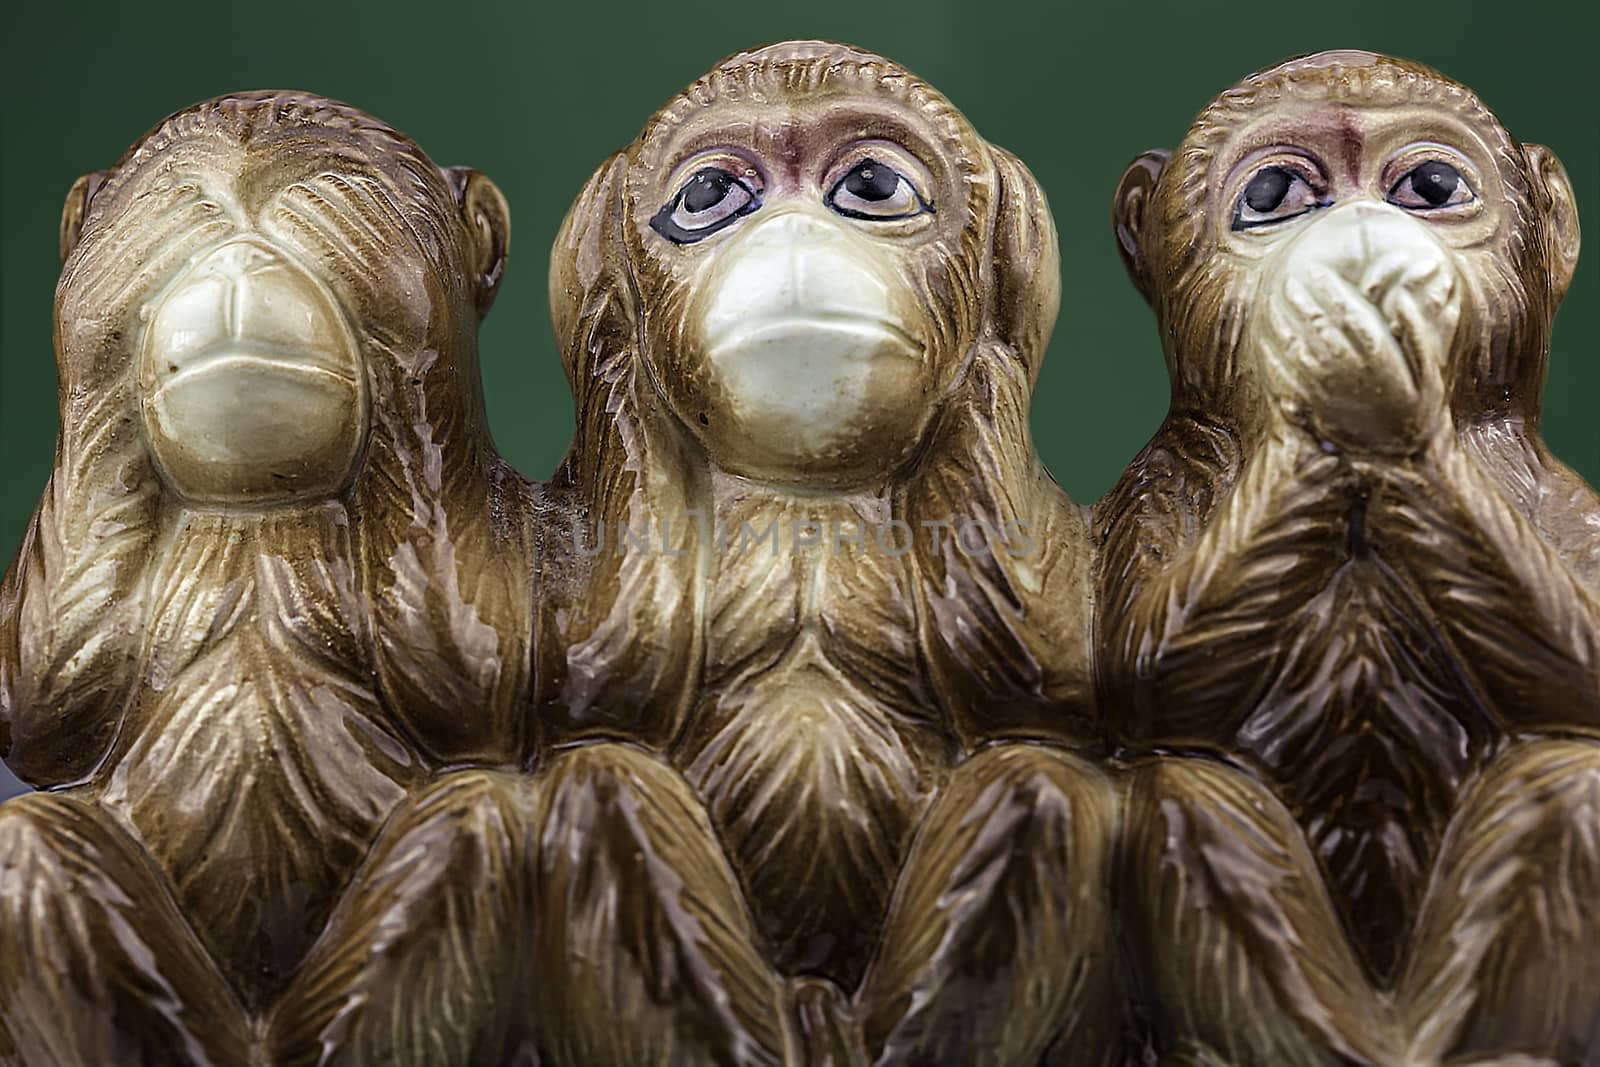 Three Wise Monkeys by fallesenphotography